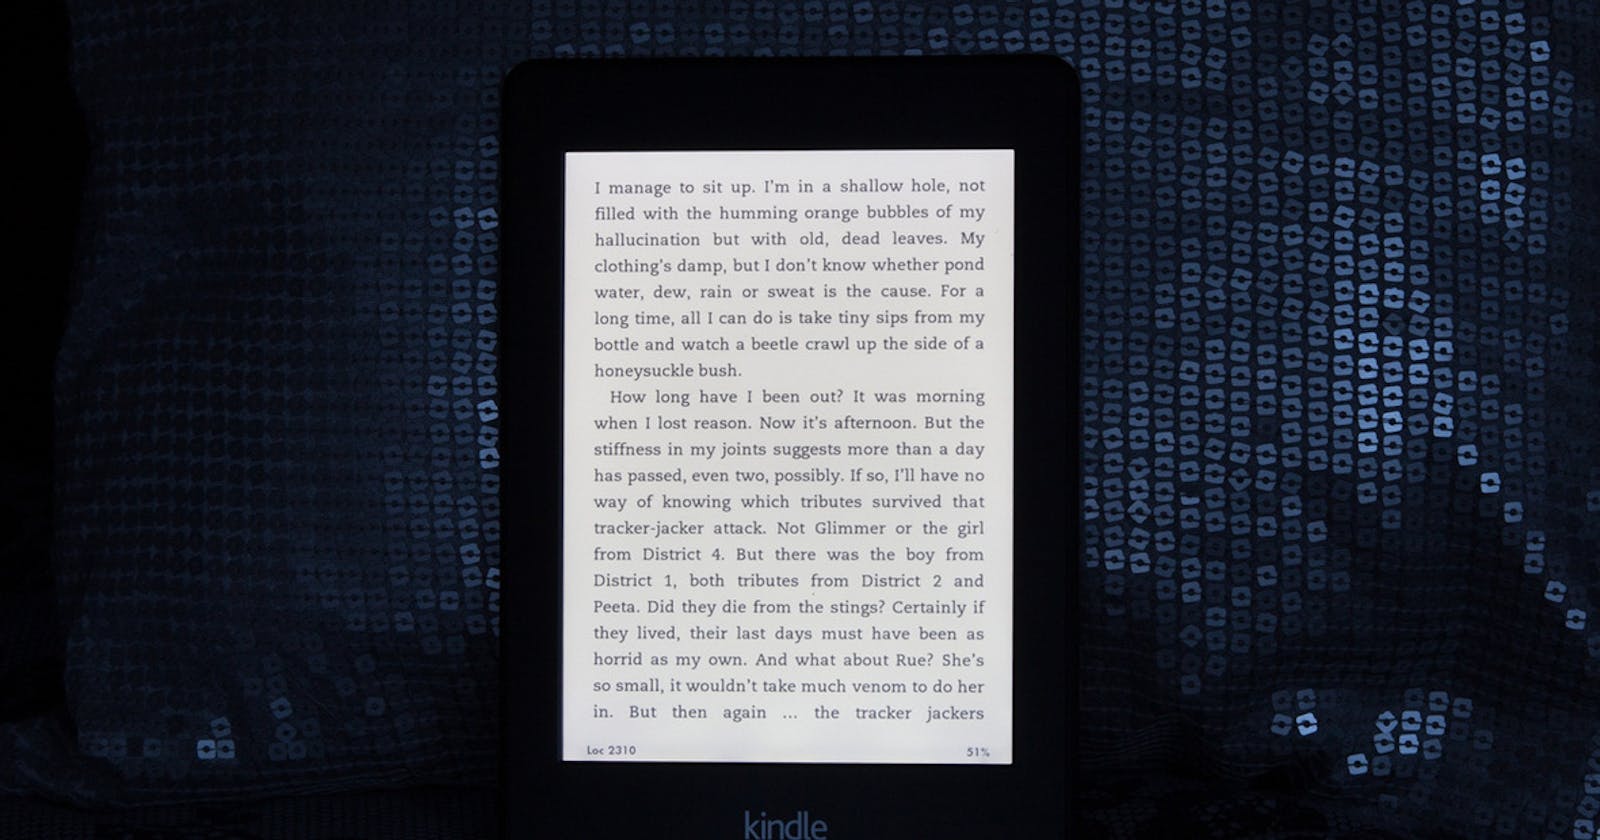 Case Study: The UX Design Evaluation of Kindle Paperwhite